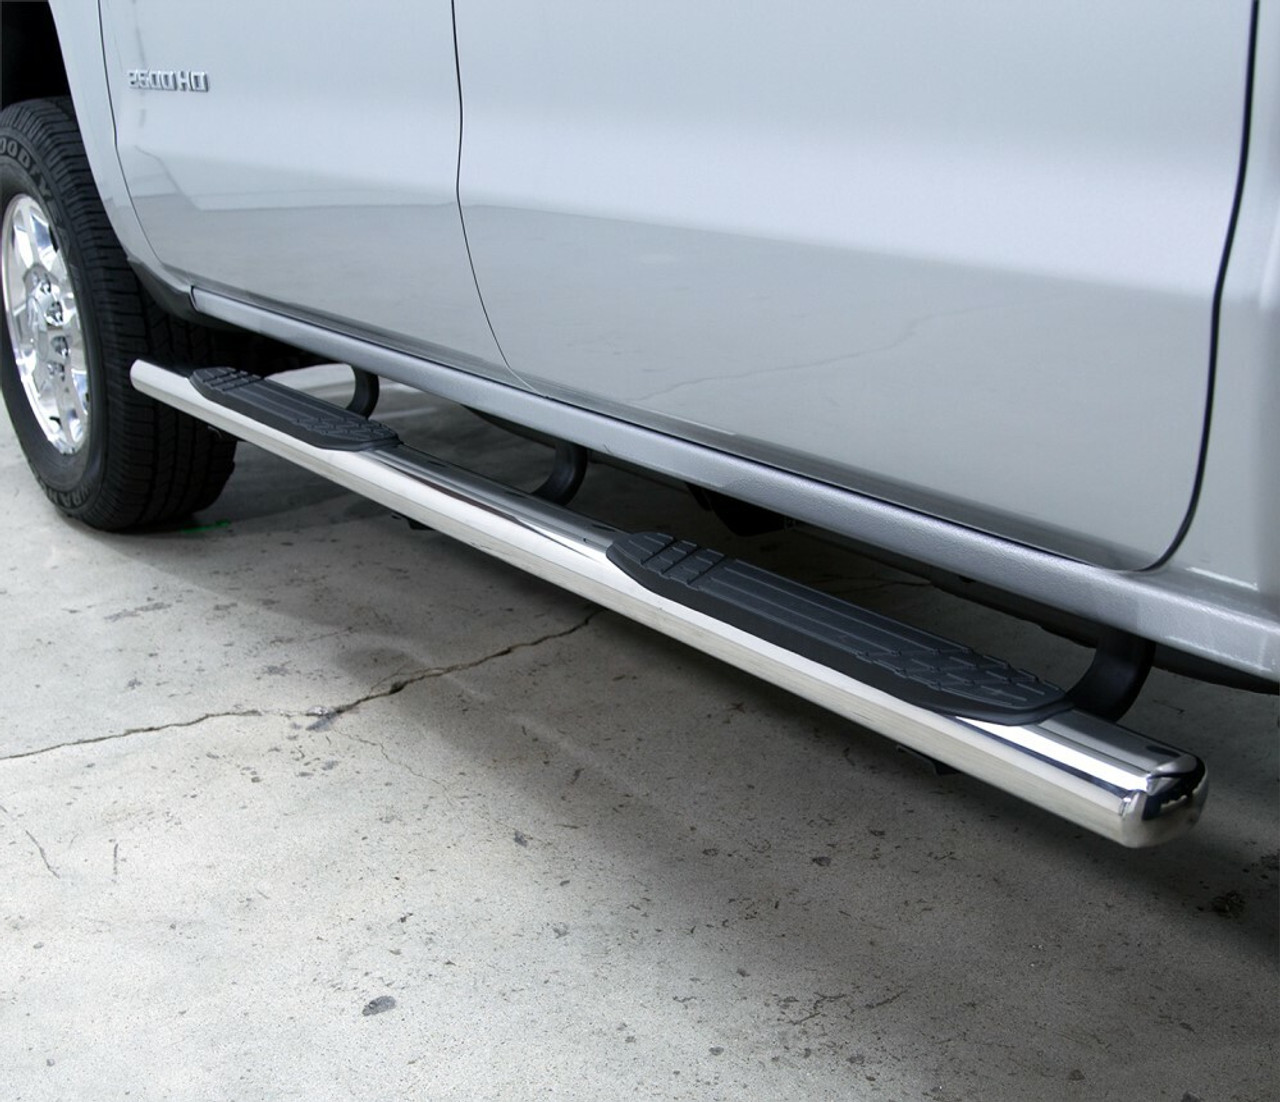 Go Rhino 684404780PS Chevrolet, Silverado 1500, 2019 - 2021, 4 inch OE Xtreme - Complete Kit: Stainless steel, Polished, 640080PS side bars + 6840475 OE Xtreme Brackets. 4 inch wide x 80 inch long side bars, New Body Style Only